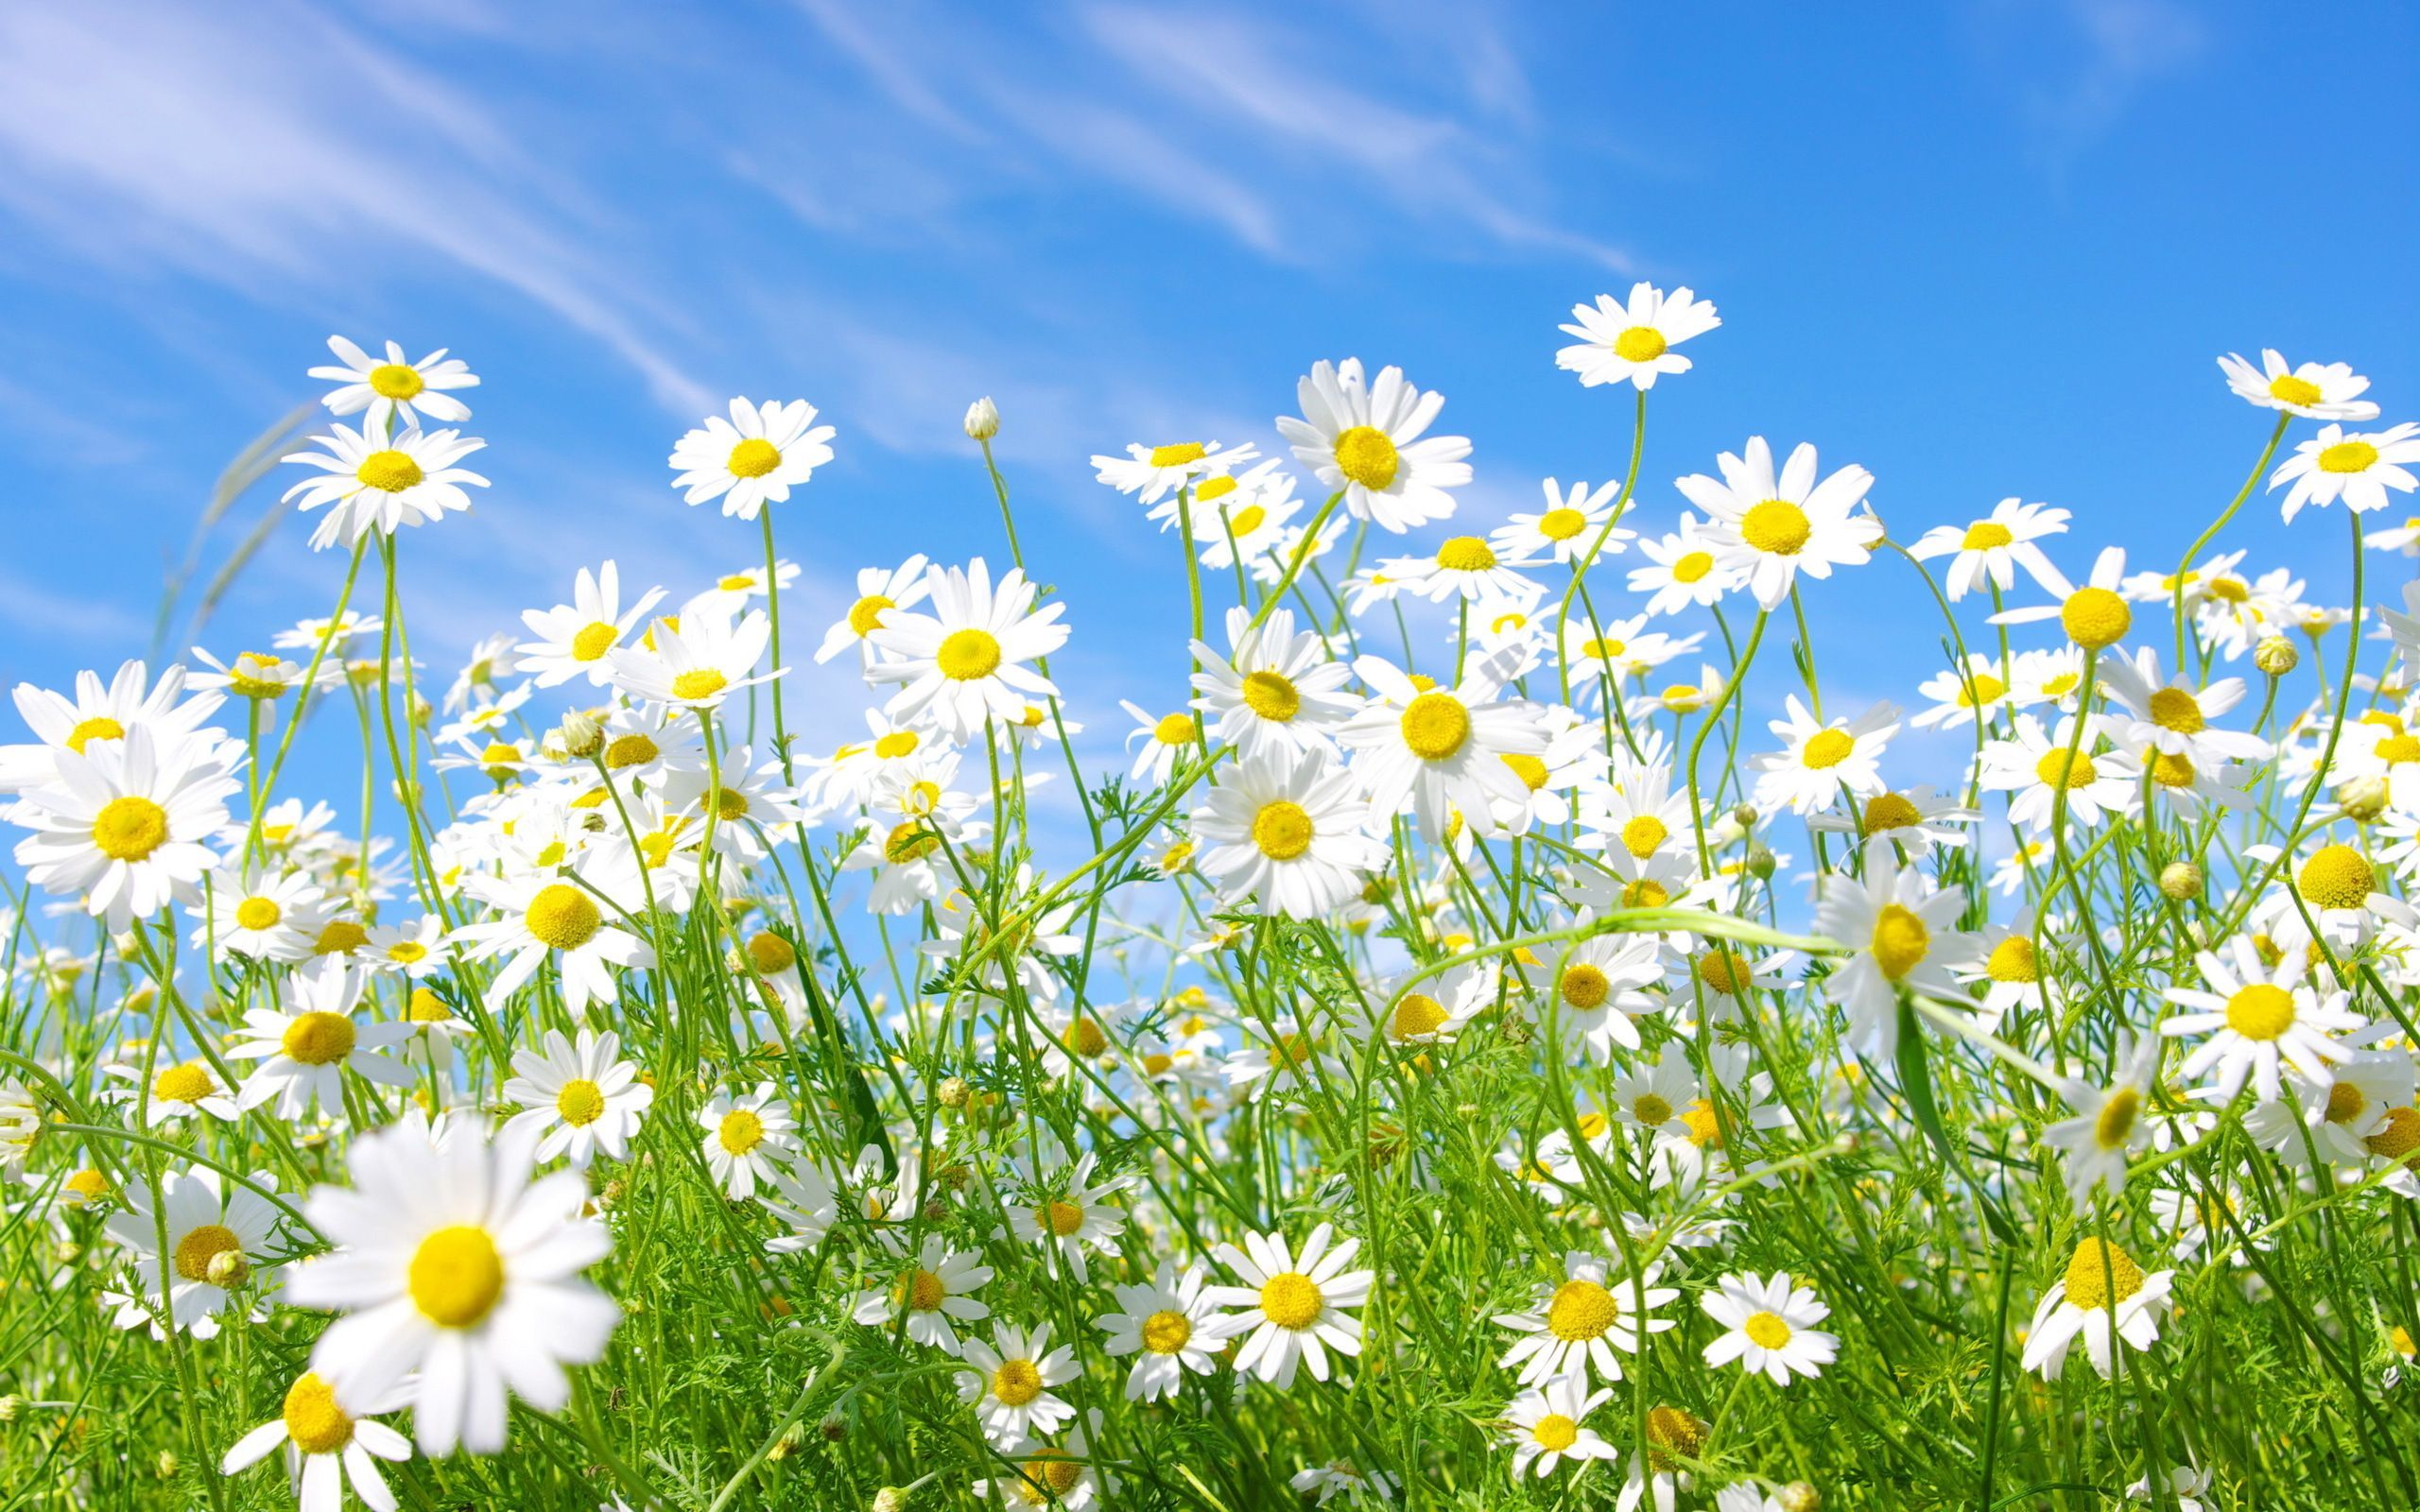 400 Daisy HD Wallpapers and Backgrounds